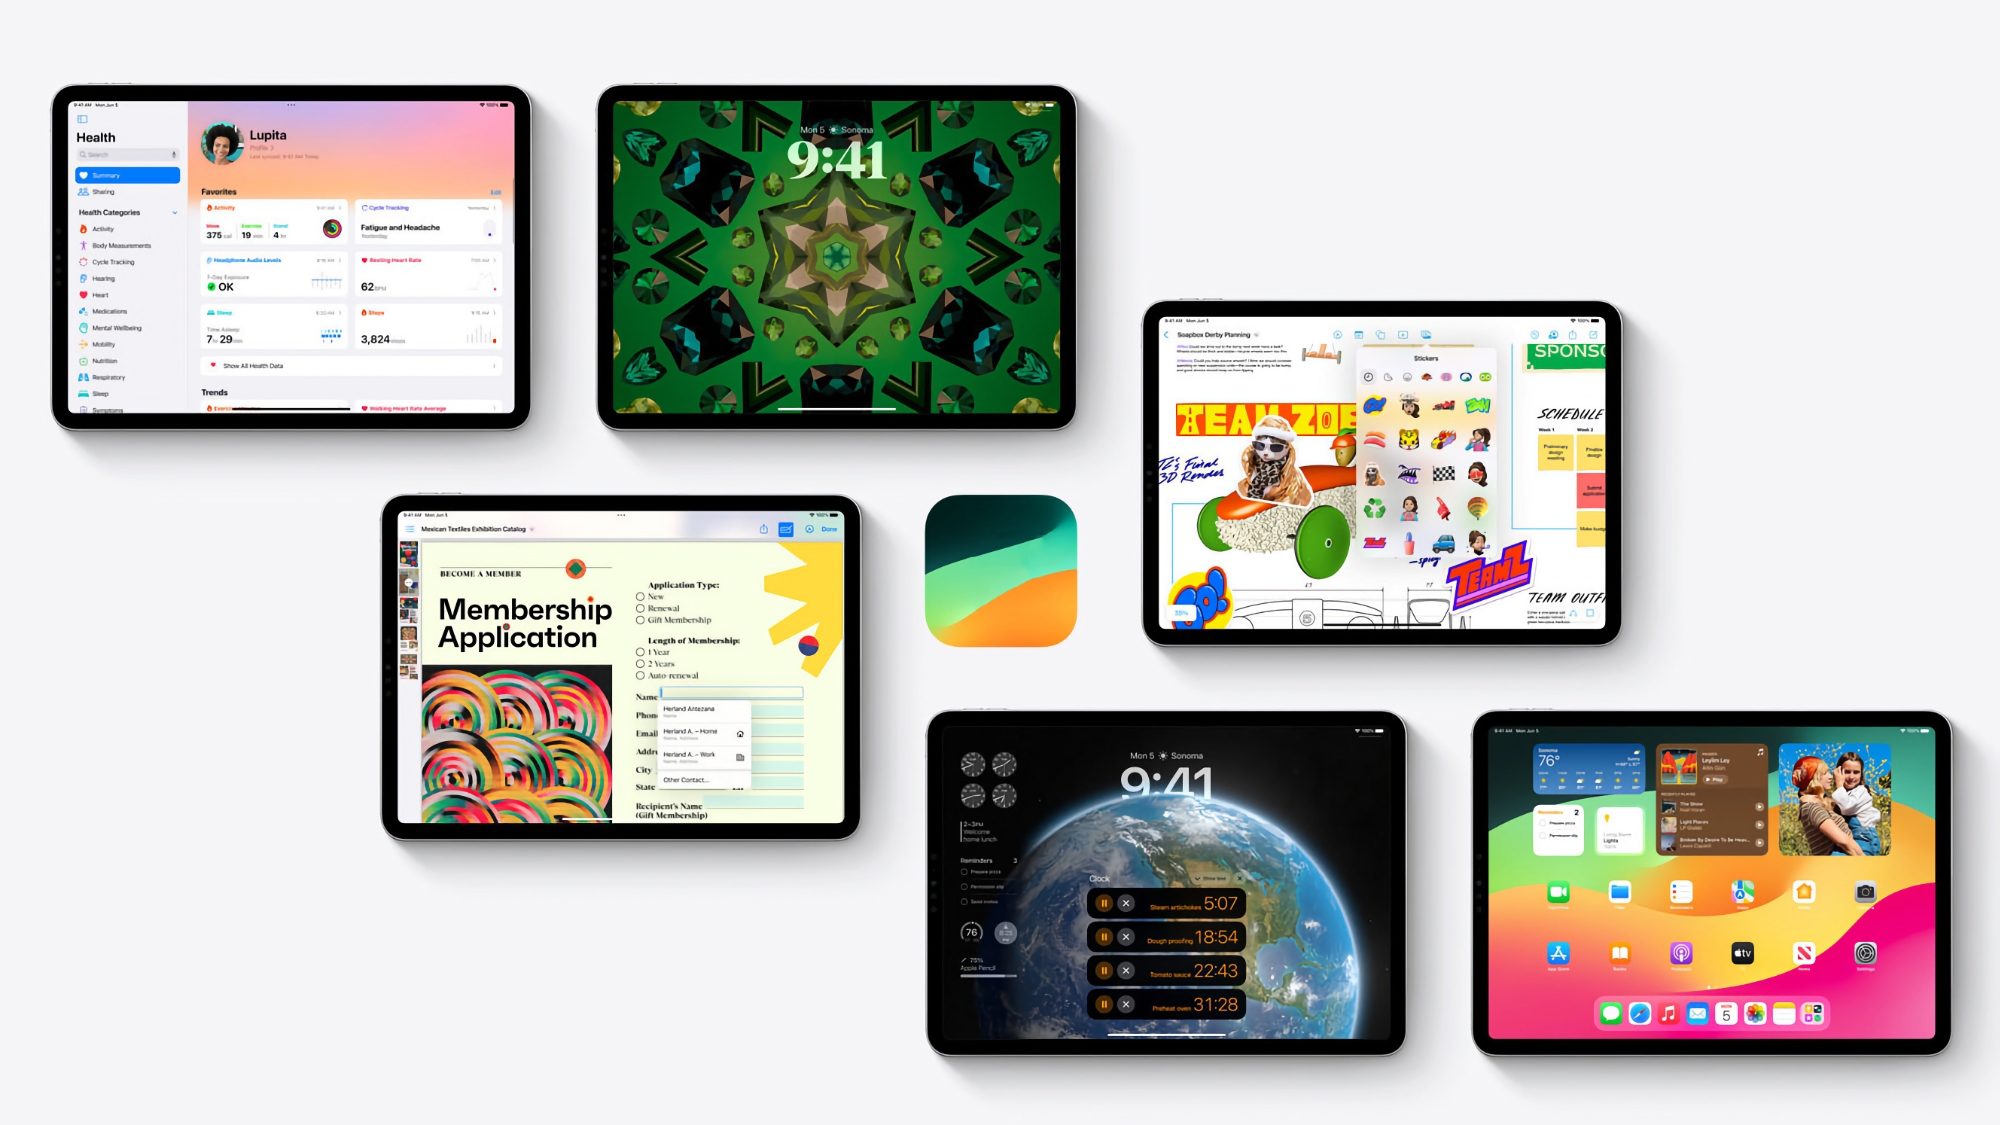 Rumour: Apple has no plans to update to iPadOS 18 for tablets with A10X Fusion chip on board